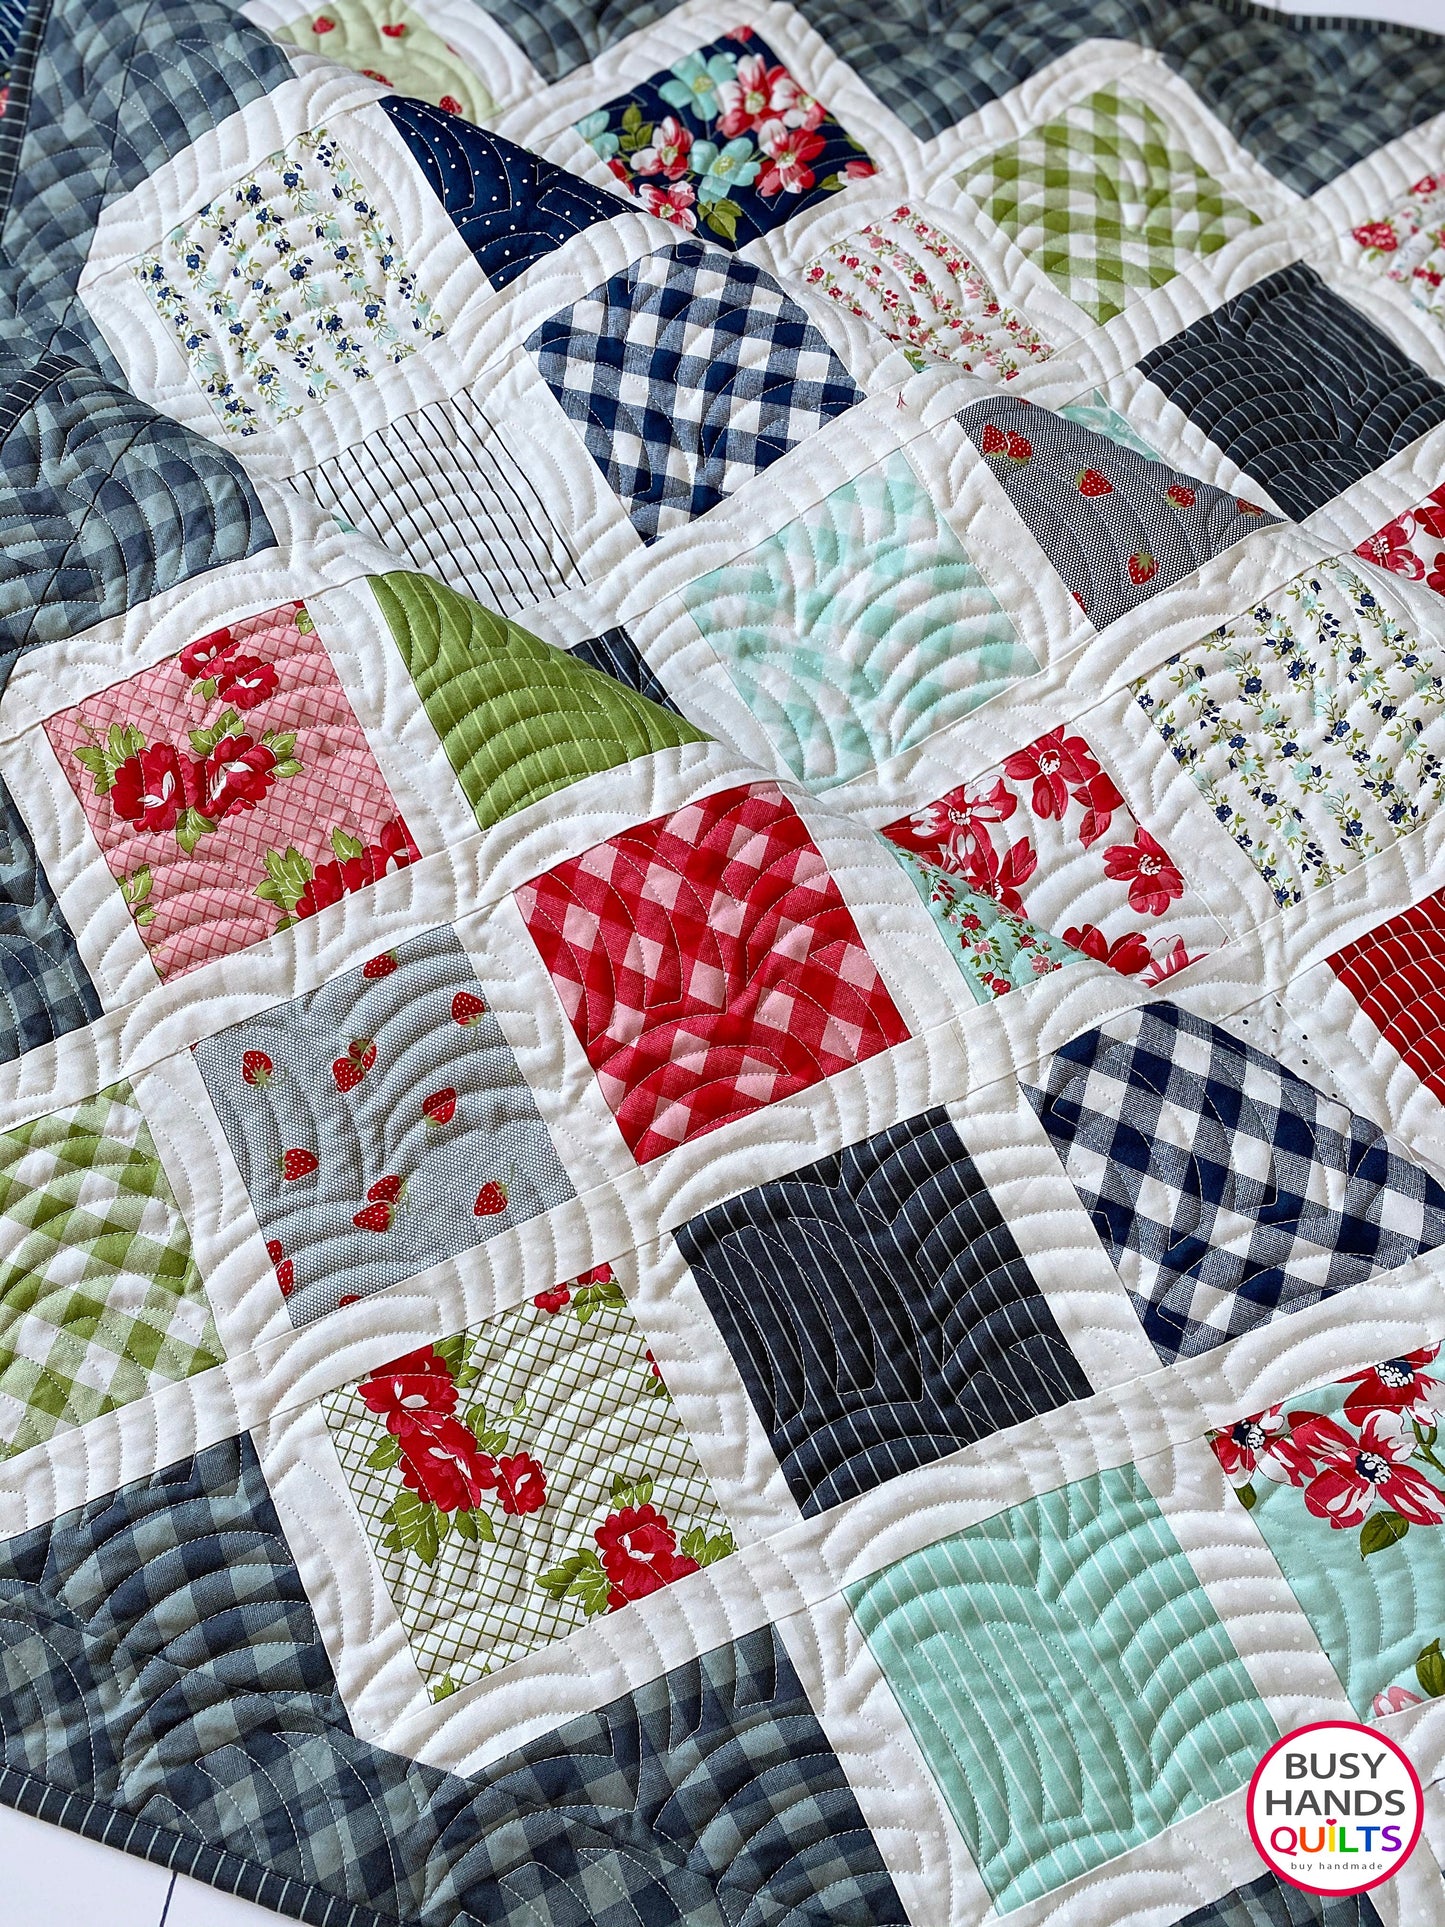 Make It Scrappy Quilt Pattern PDF DOWNLOAD Busy Hands Quilts $12.99